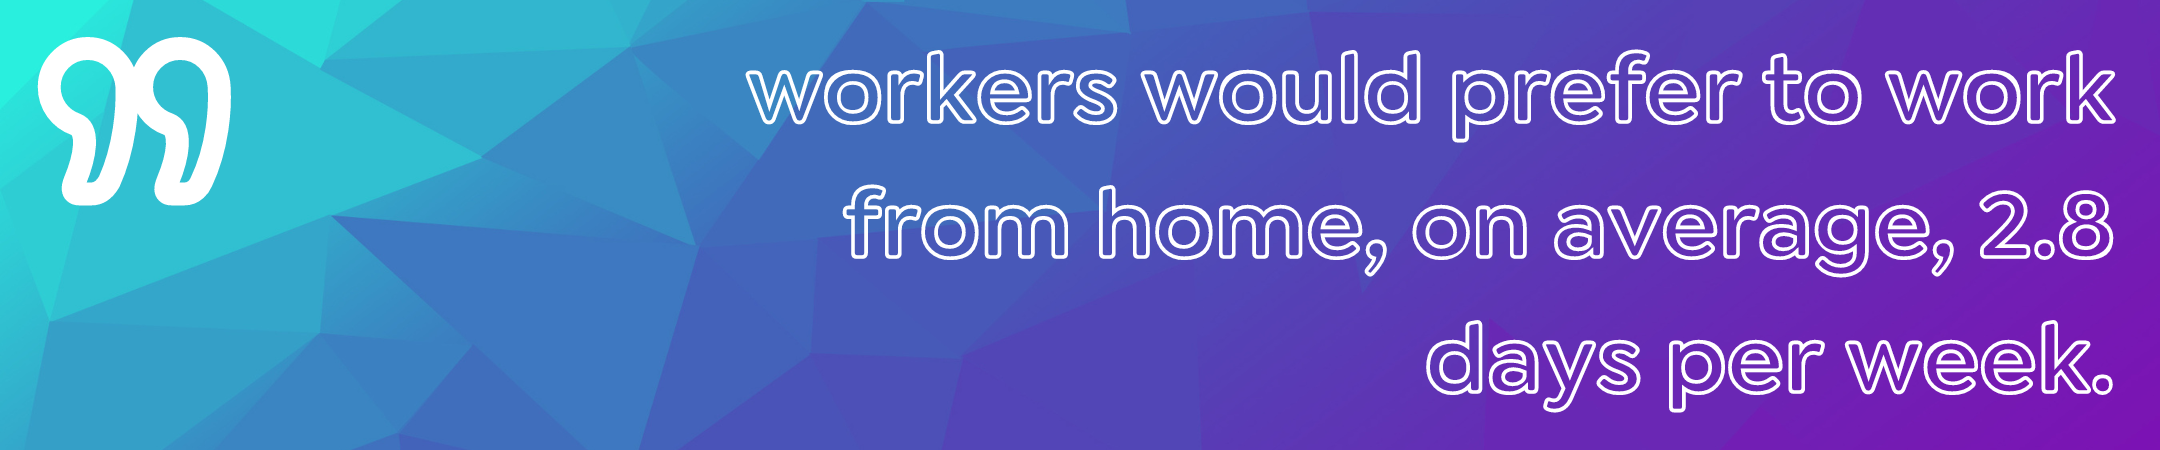 workers would prefer to work from home, on average, 2.8 days per week.